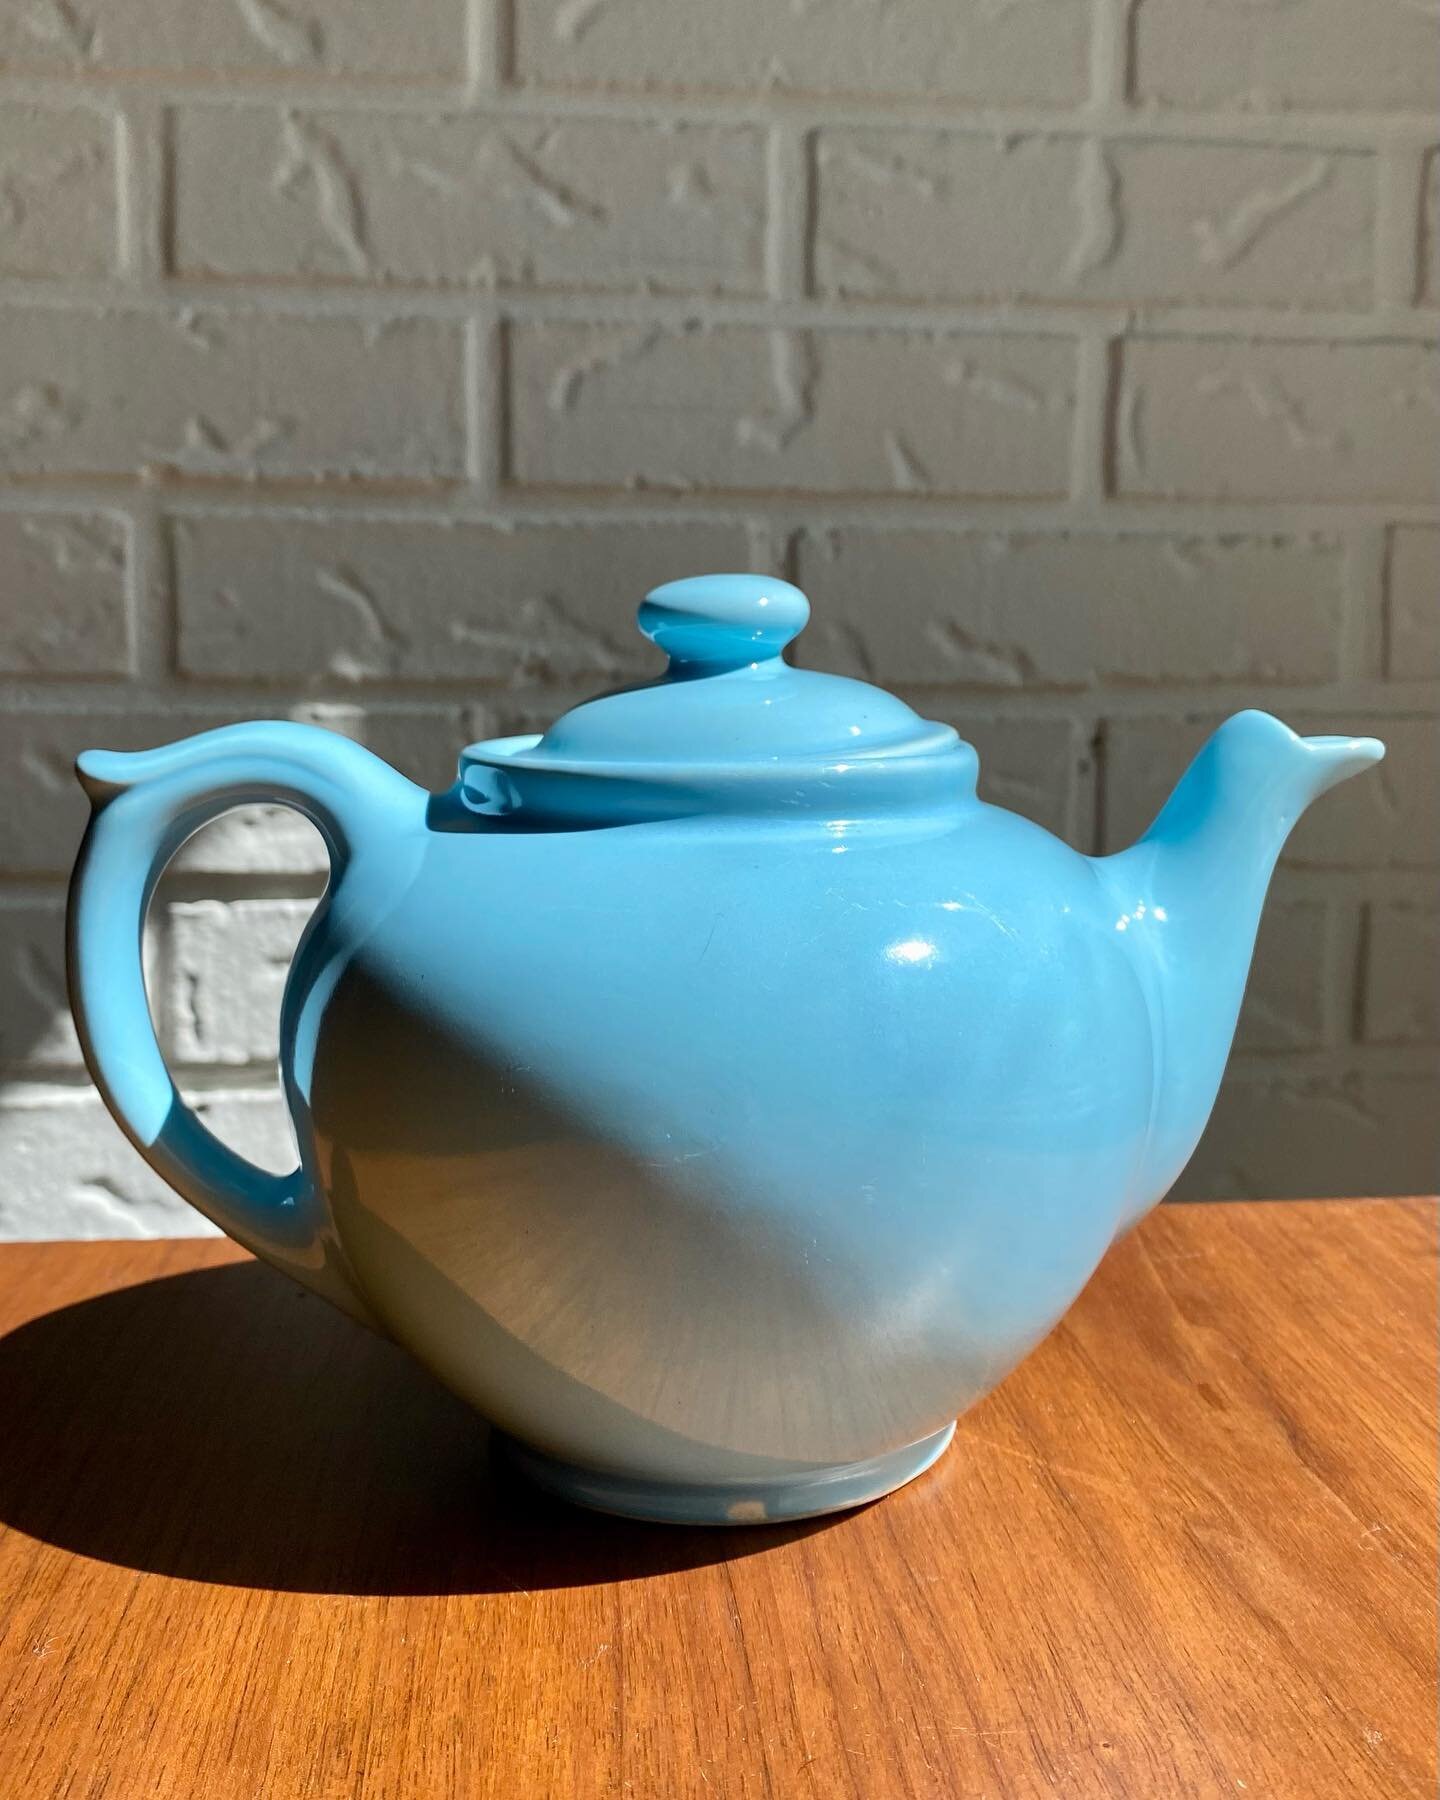 ✨FOR SALE:✨
As soon as I saw this color, I ran straight for it! Vintage teapot, probably 1950s? Possibly 1940s? Not signed/Unmarked, other than that little stamped x on the bottom edge. Perfect condition. 
Approximately 6&rdquo; tall with lid, 8.5&rd